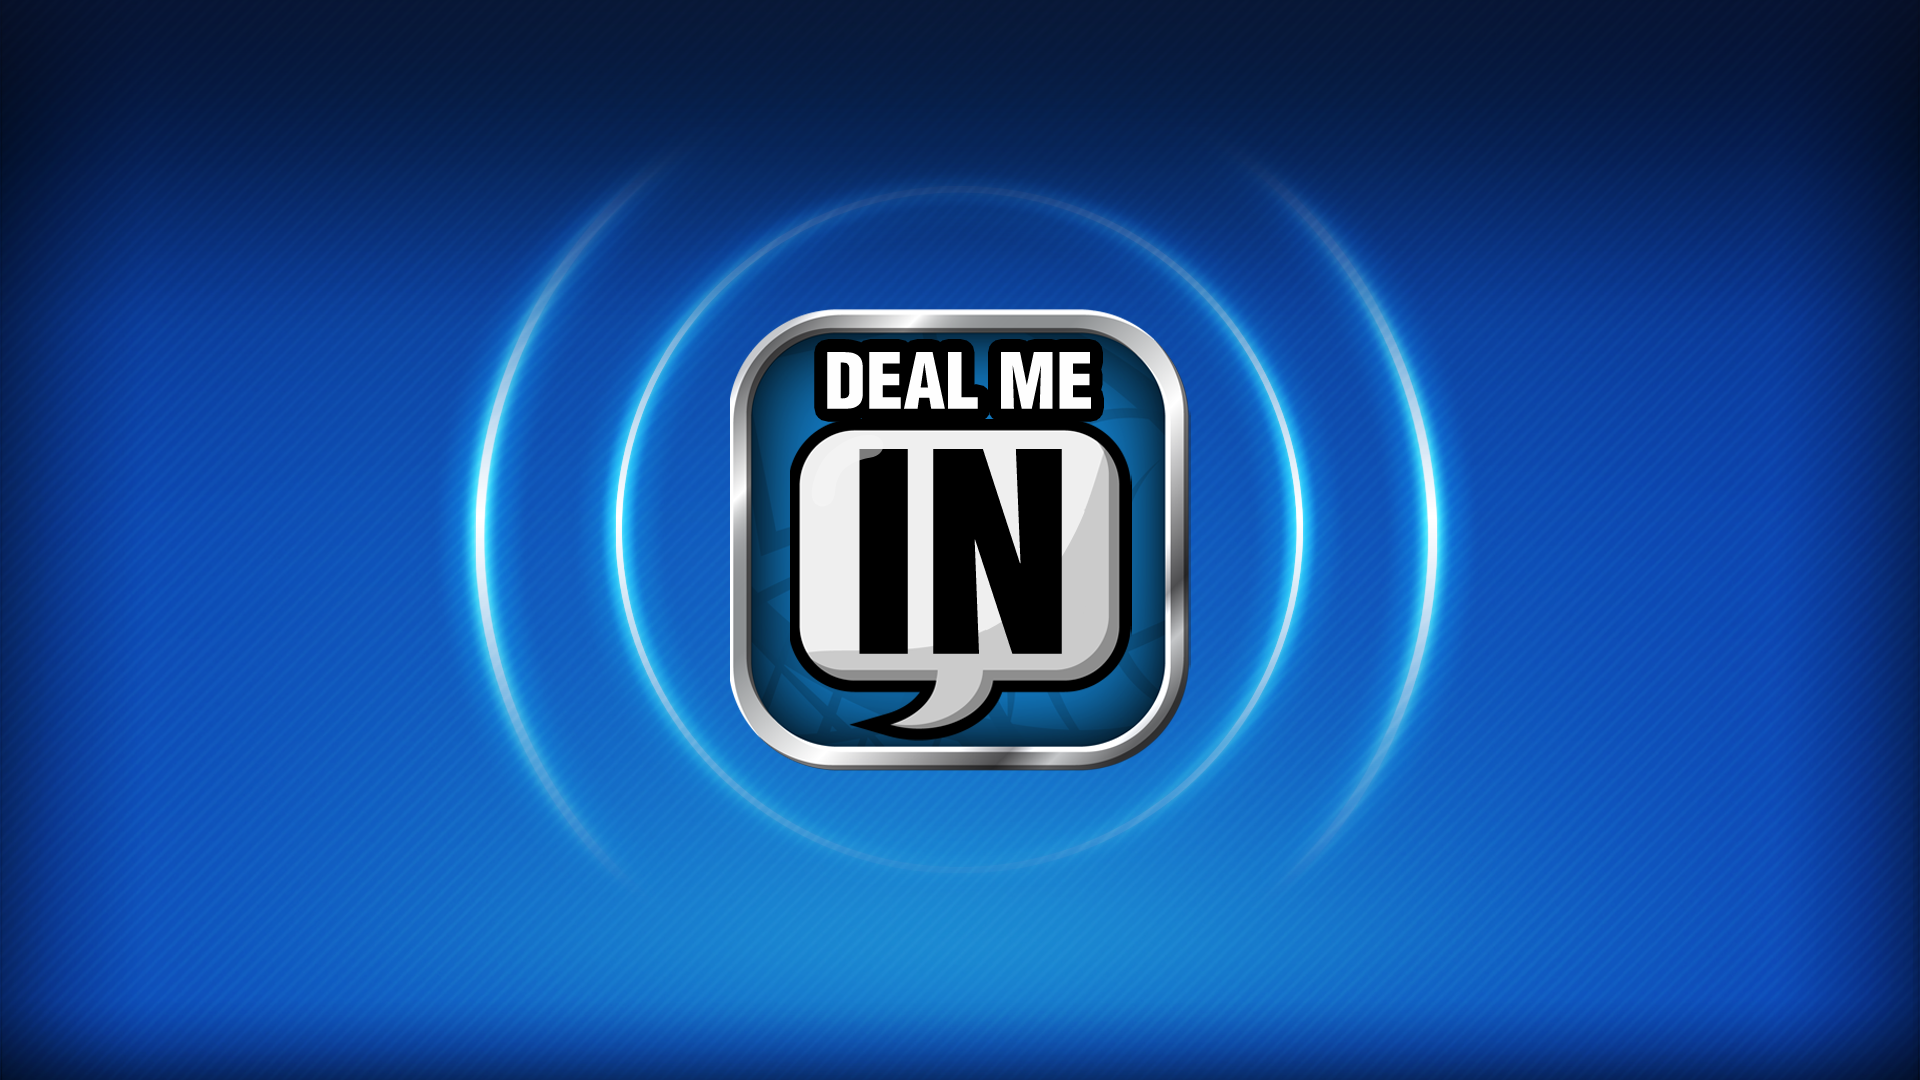 Icon for Deal me in